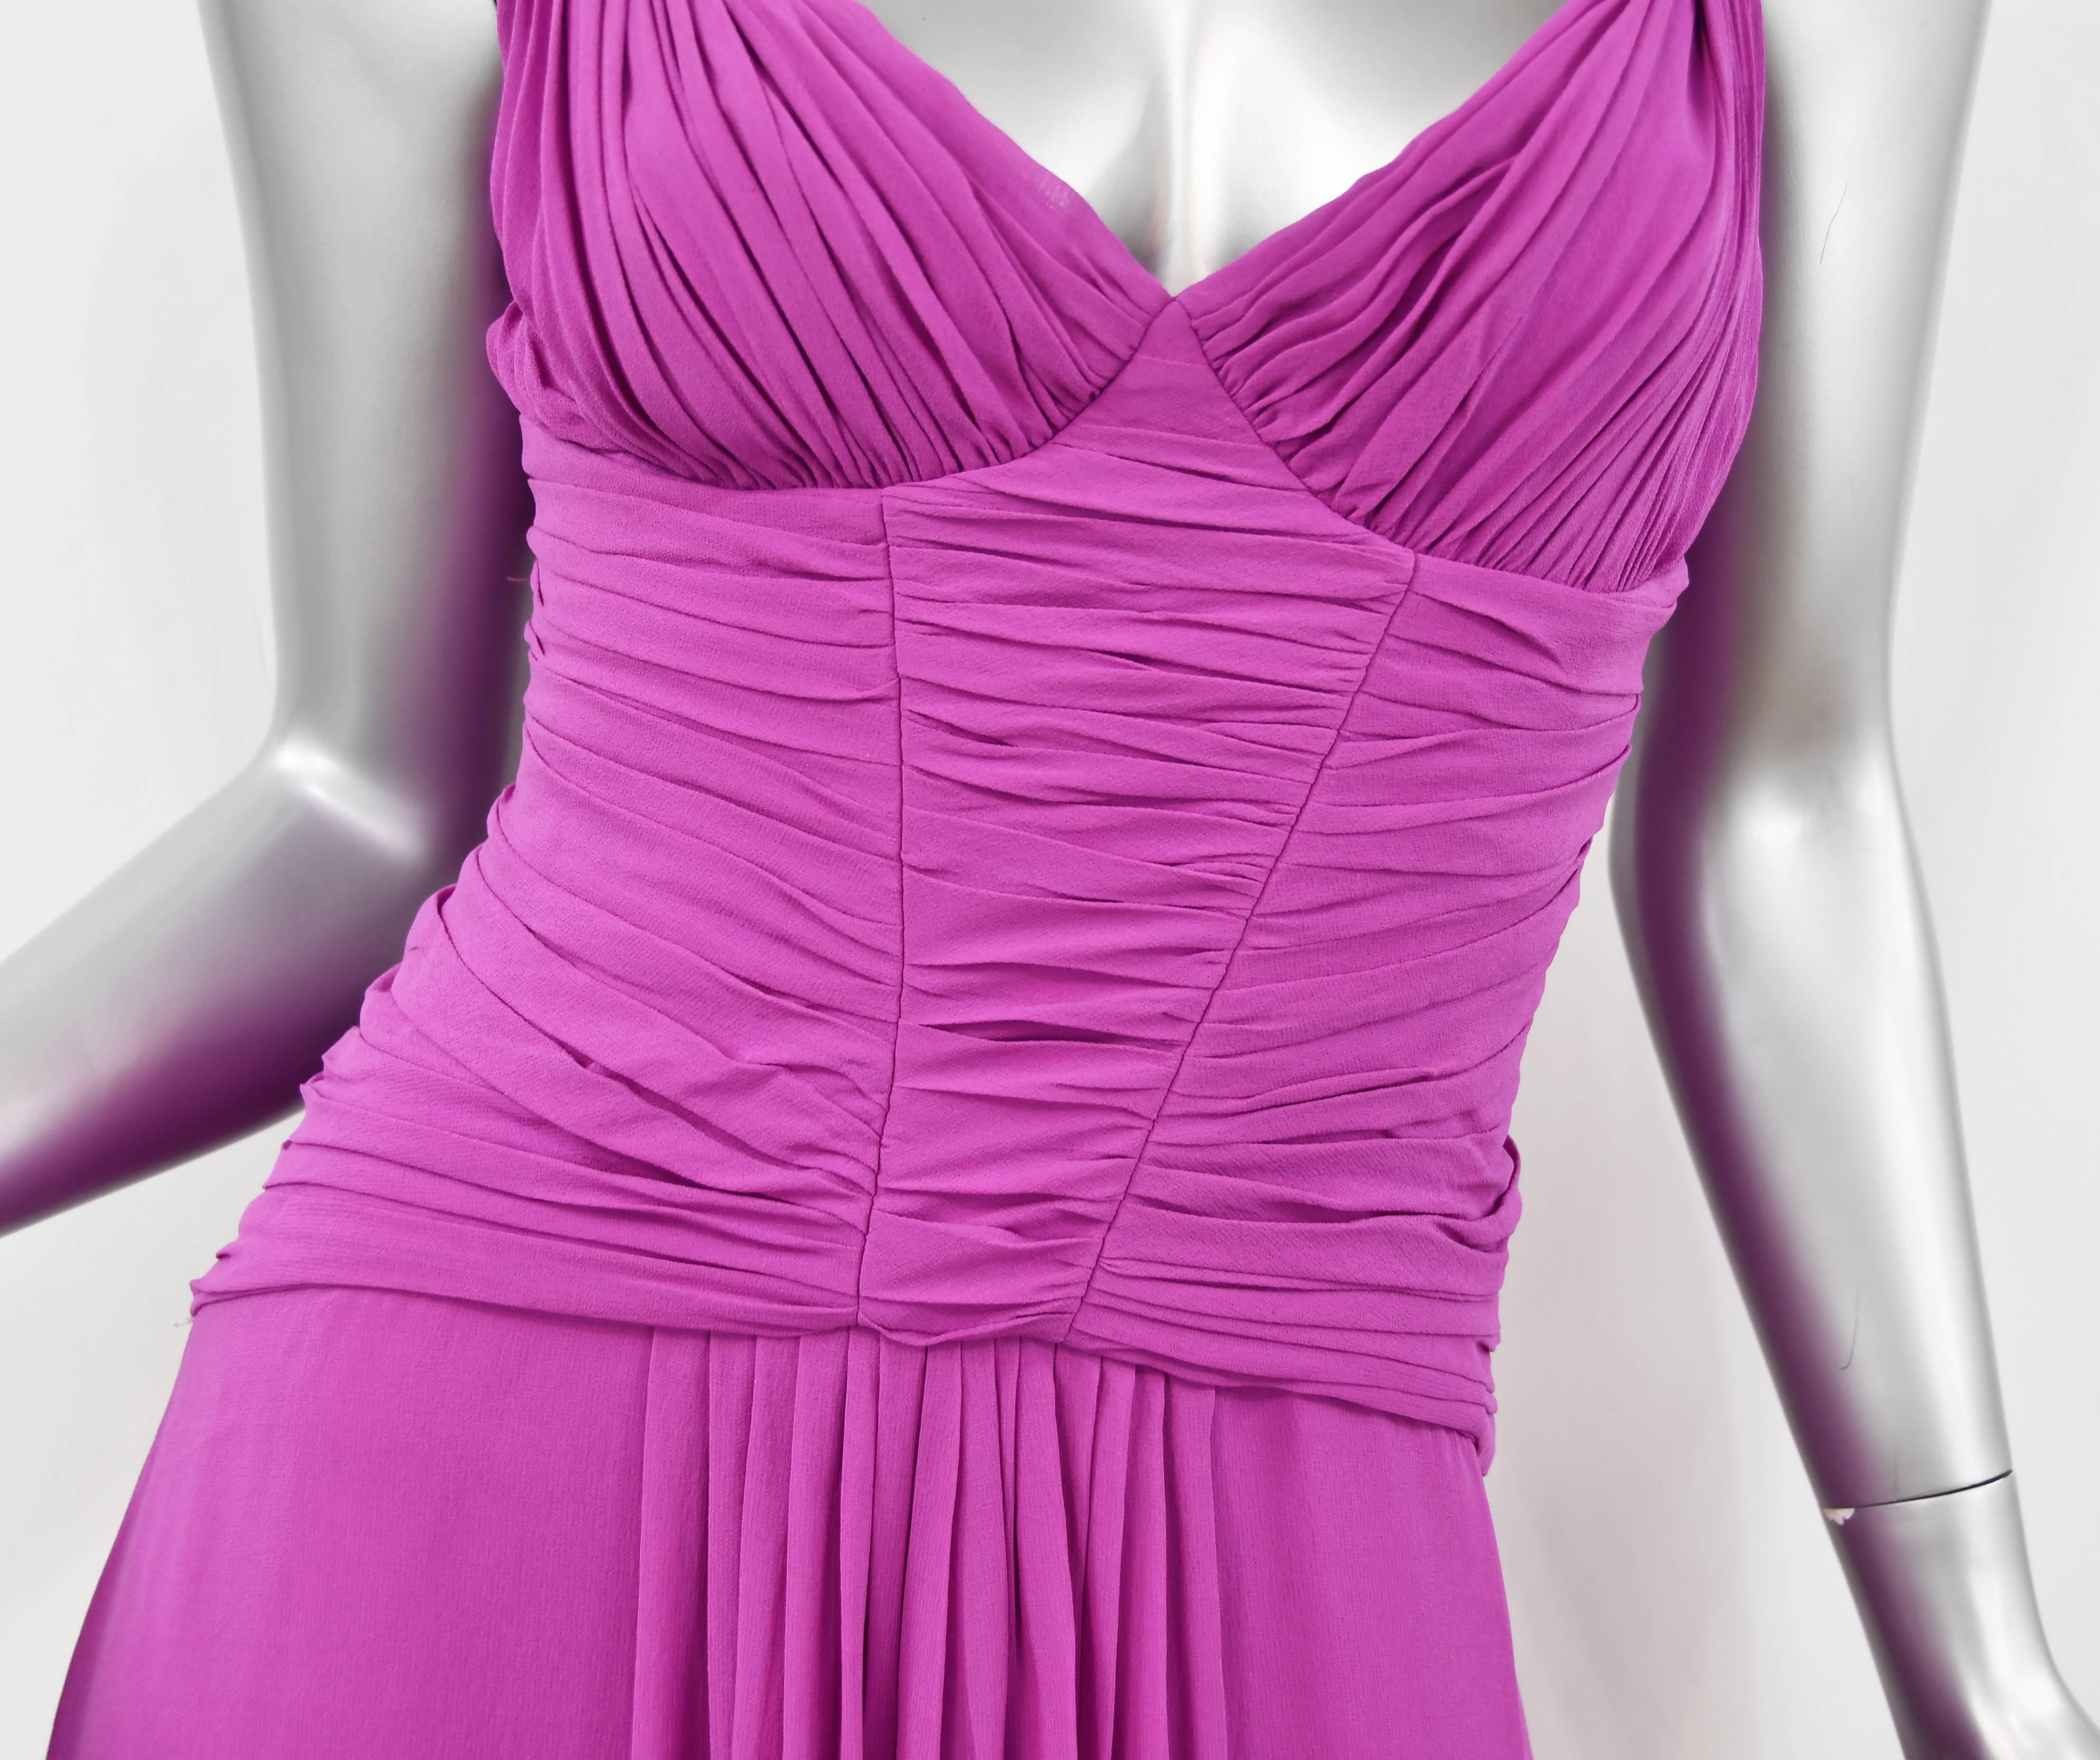 Stunning Emanuel Ungaro silk chiffon gown in eye catching magenta.  Pleated detail adorns the bodice.  The gown drapes beautifully with tucks at the top of the skirt.  A stand out sexy and feminine piece in excellent condition.  Loved on the Red